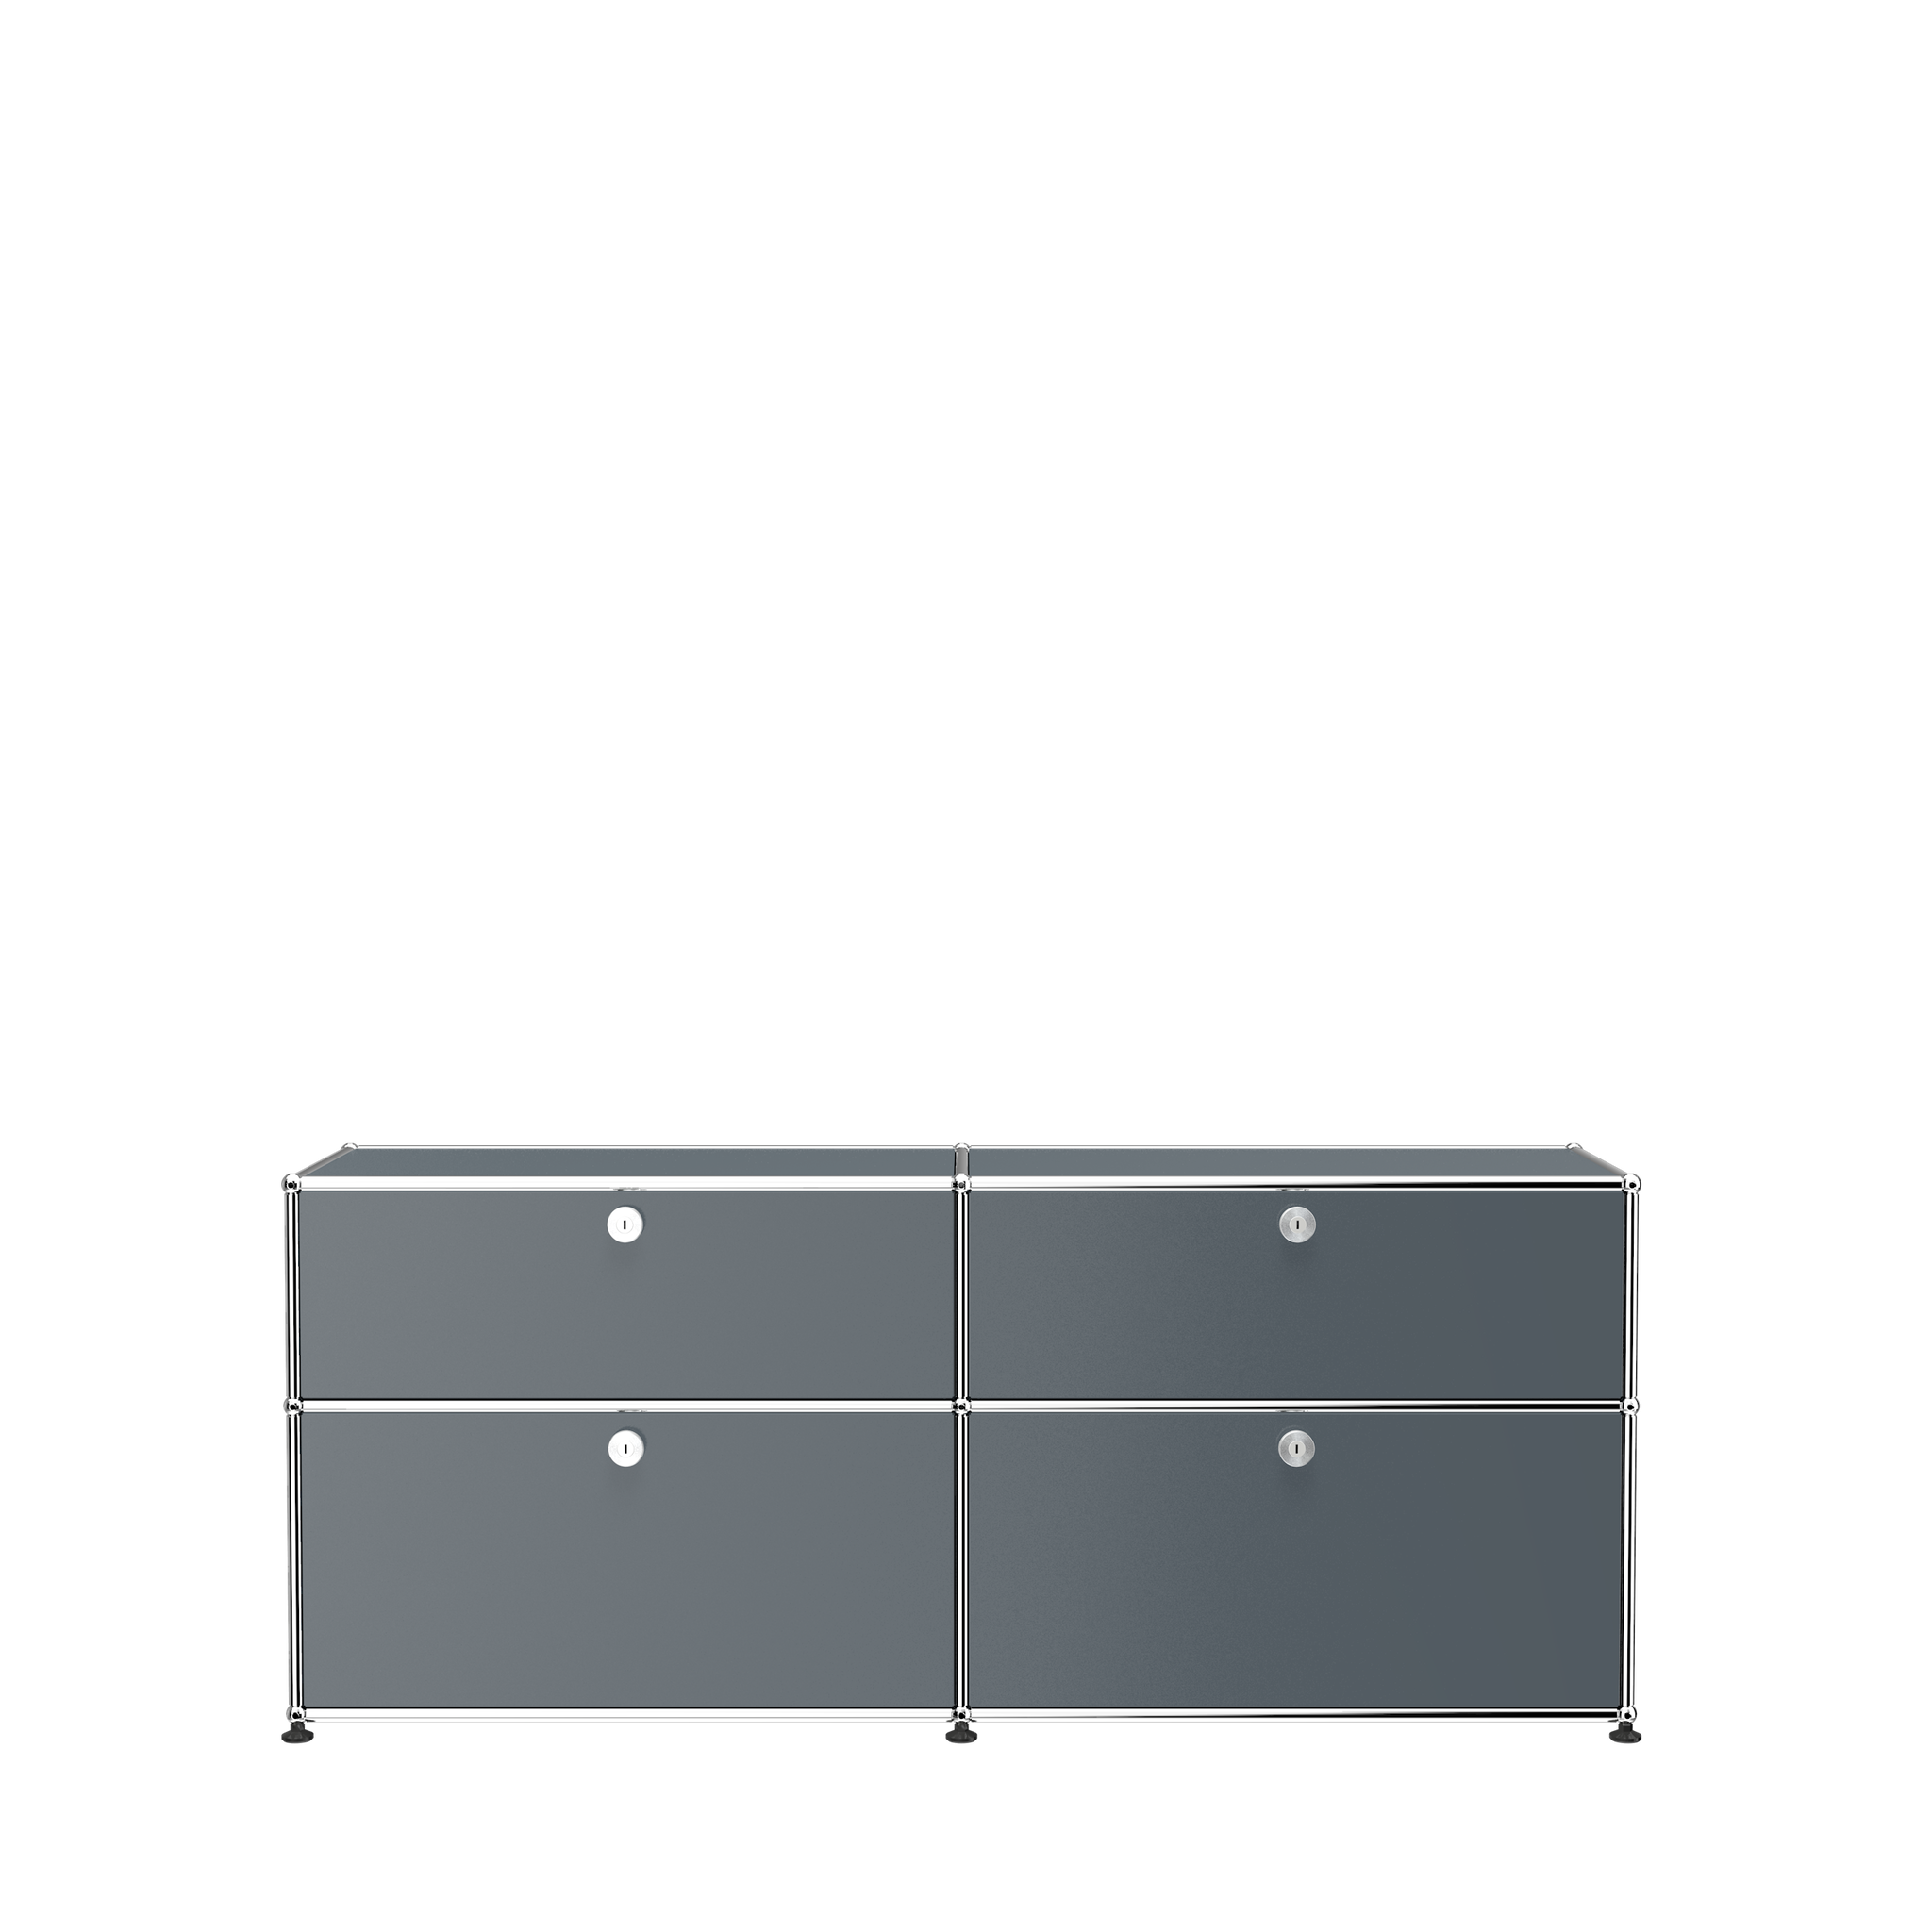 USM Haller Storage Credenza Sideboard with Drawers (D) in Mid Gray